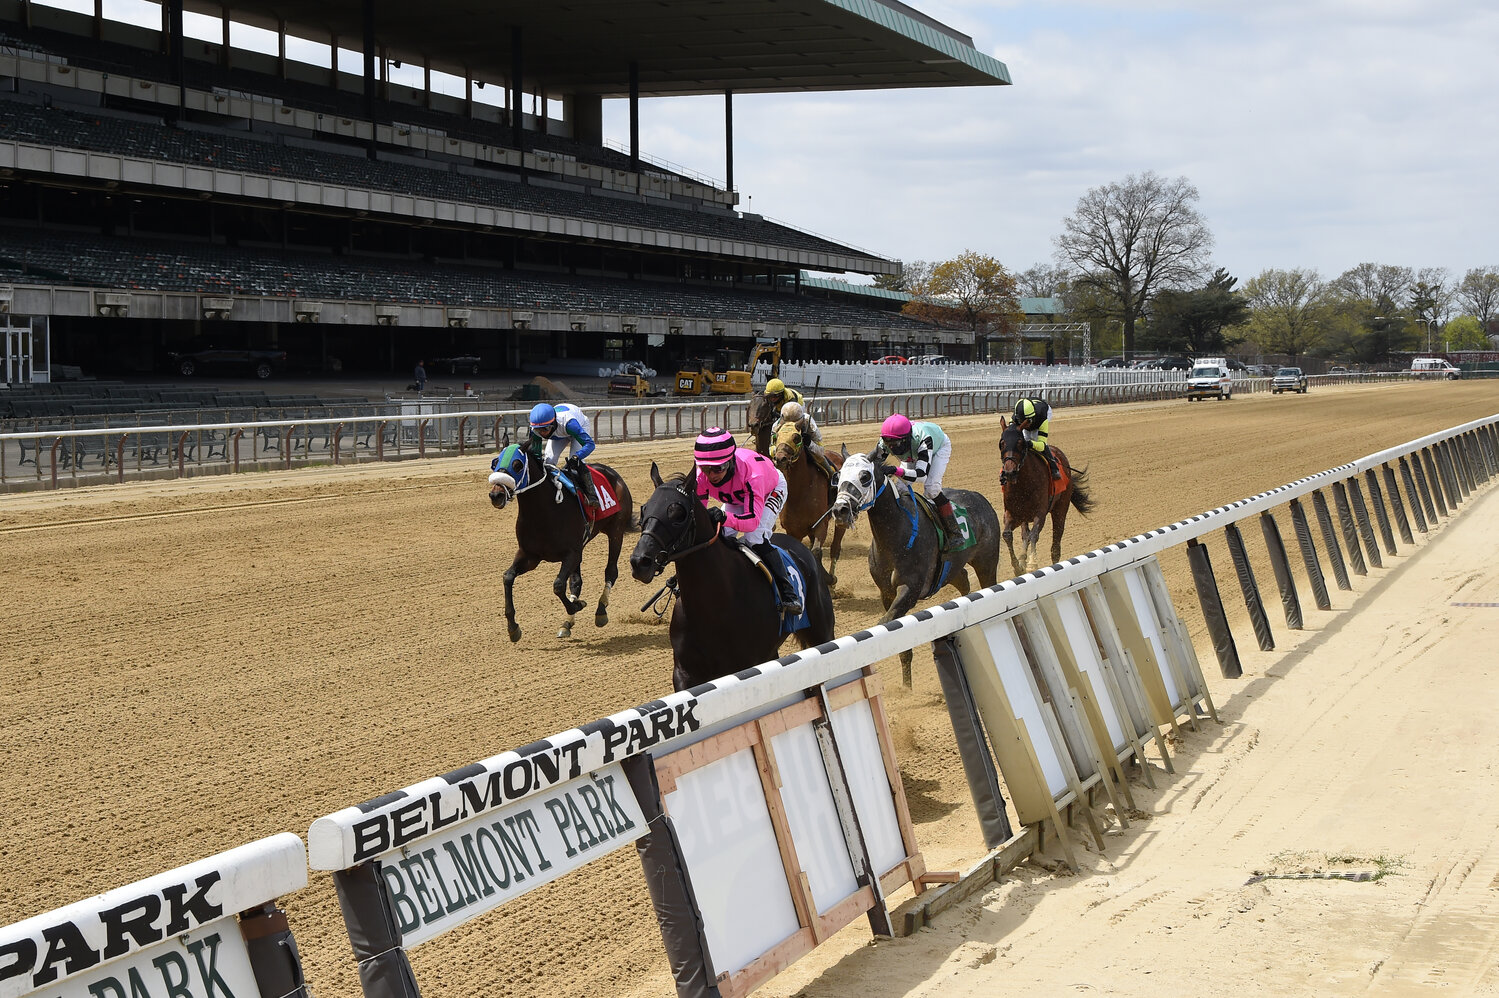 Belmont Park is currently undergoing renovations scheduled to be completed in 2026. The 2024 Belmont Stakes will be run at Saratoga Race Course, and the New York Racing Association said the 2025 Belmont Stakes will also likely be run at Saratoga Race Course.